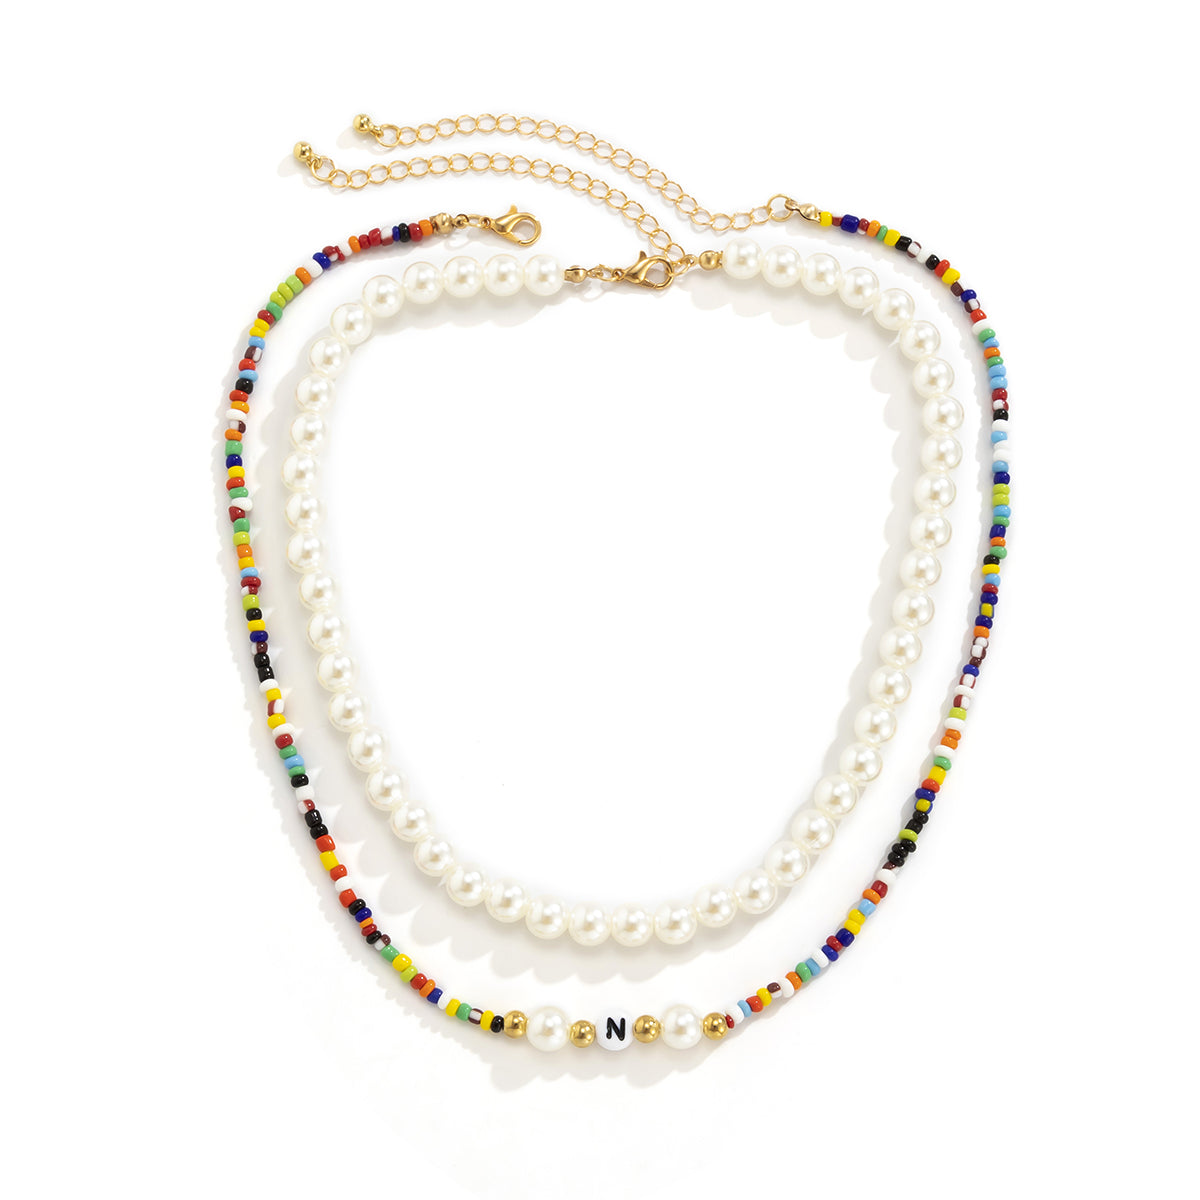 Pearl & Vibrant Howlite 18K Gold-Plated 'N' Beaded Necklace Set